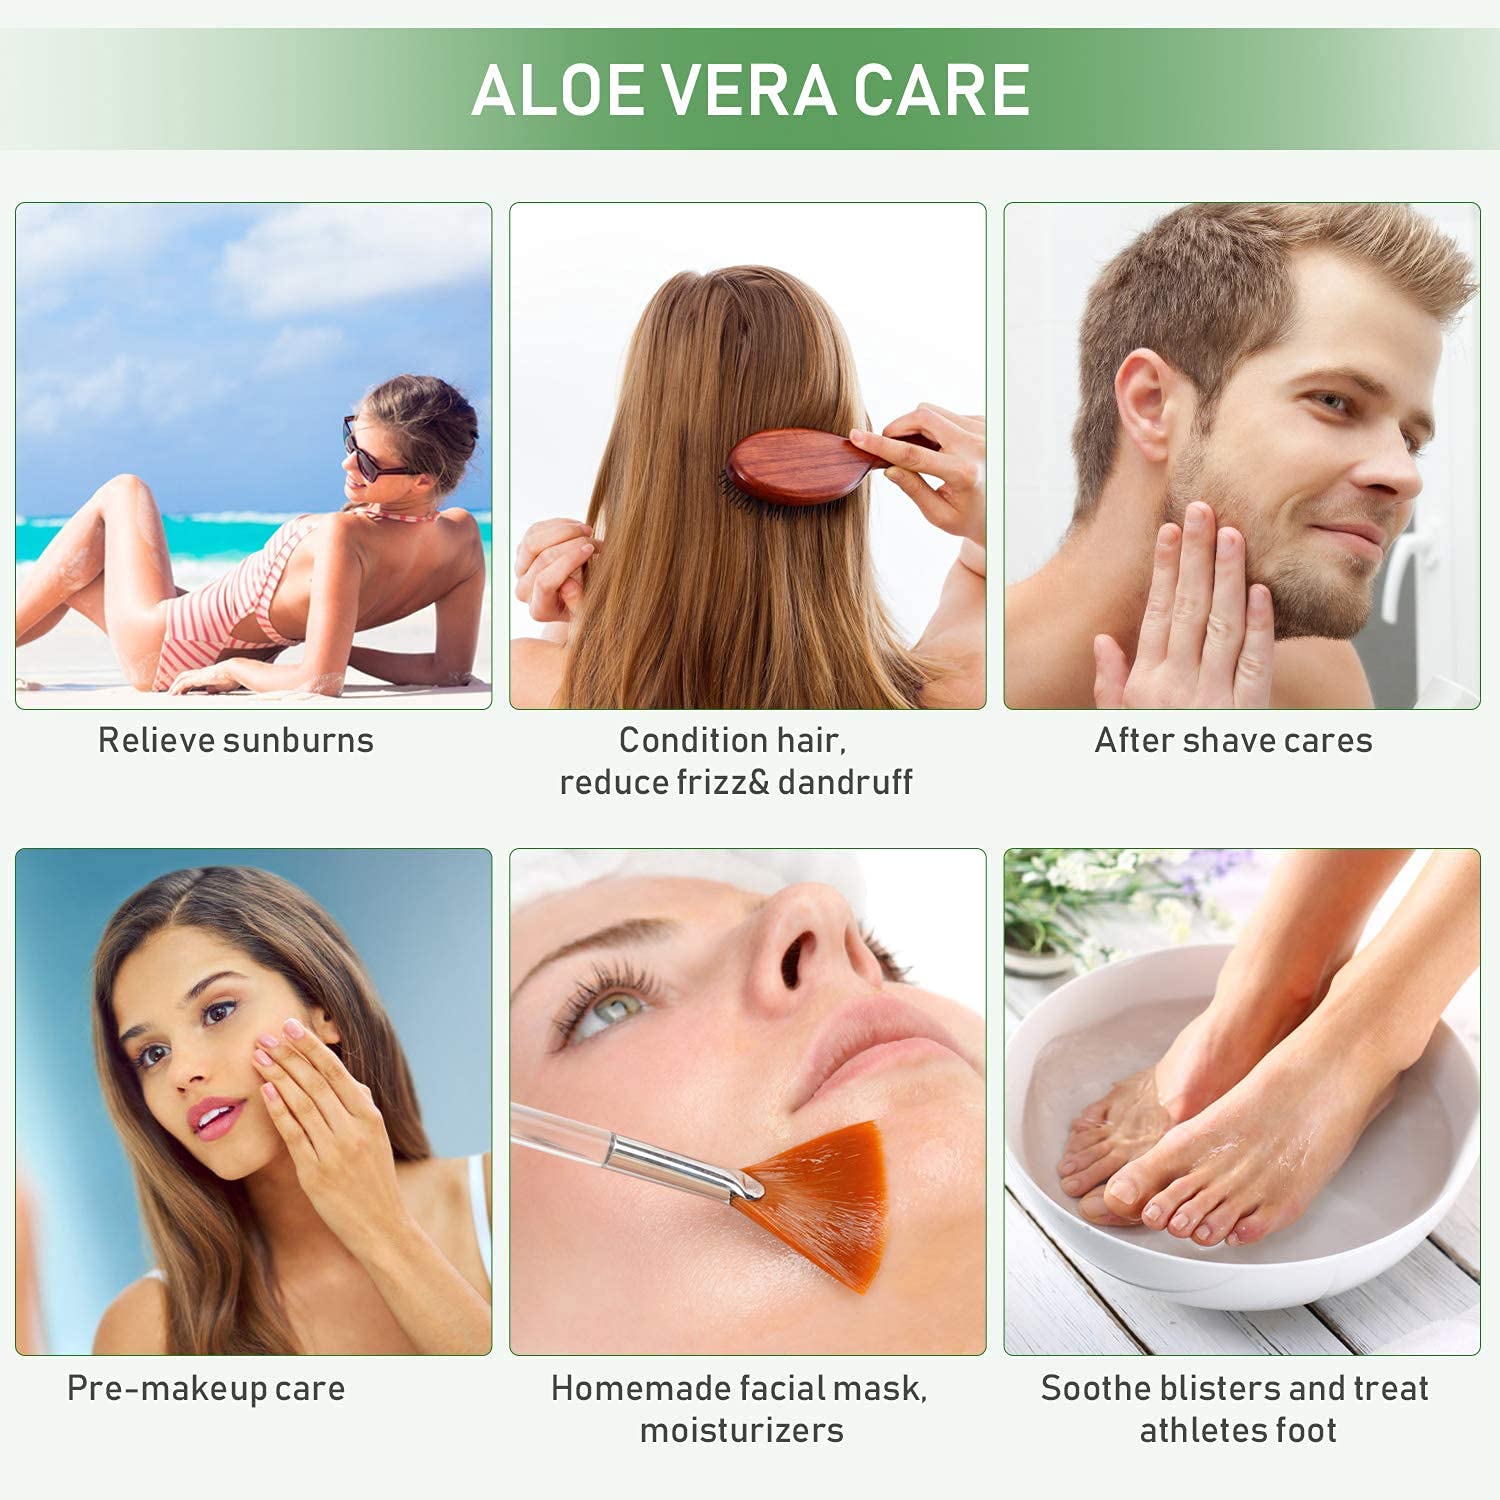 VoilaVe Pure Aloe Vera Gel for Skin and Hair Care